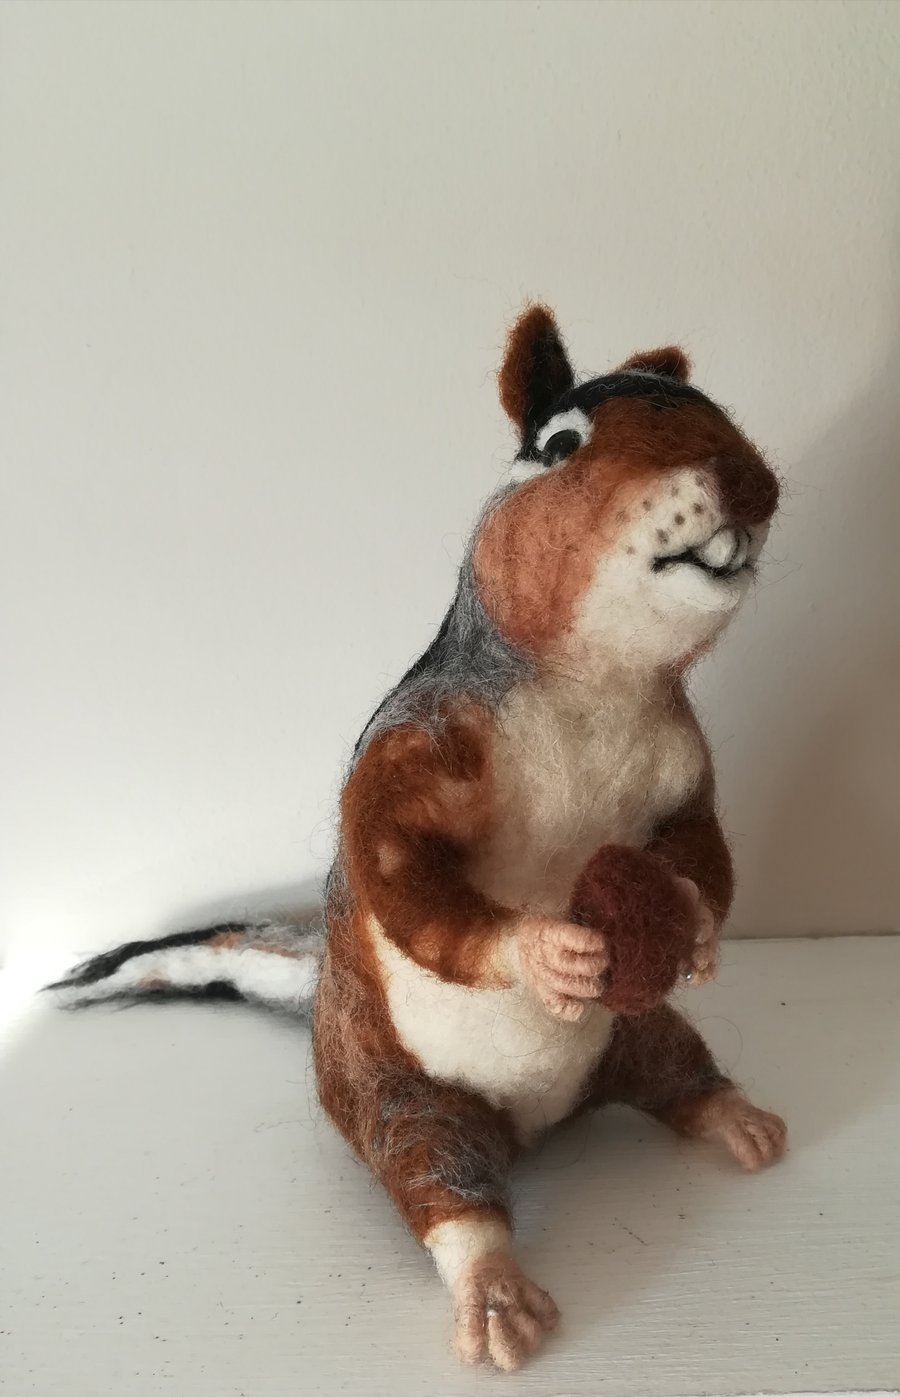 Chipmunk character needle felted wool sculpture collectable collectables OOAK so